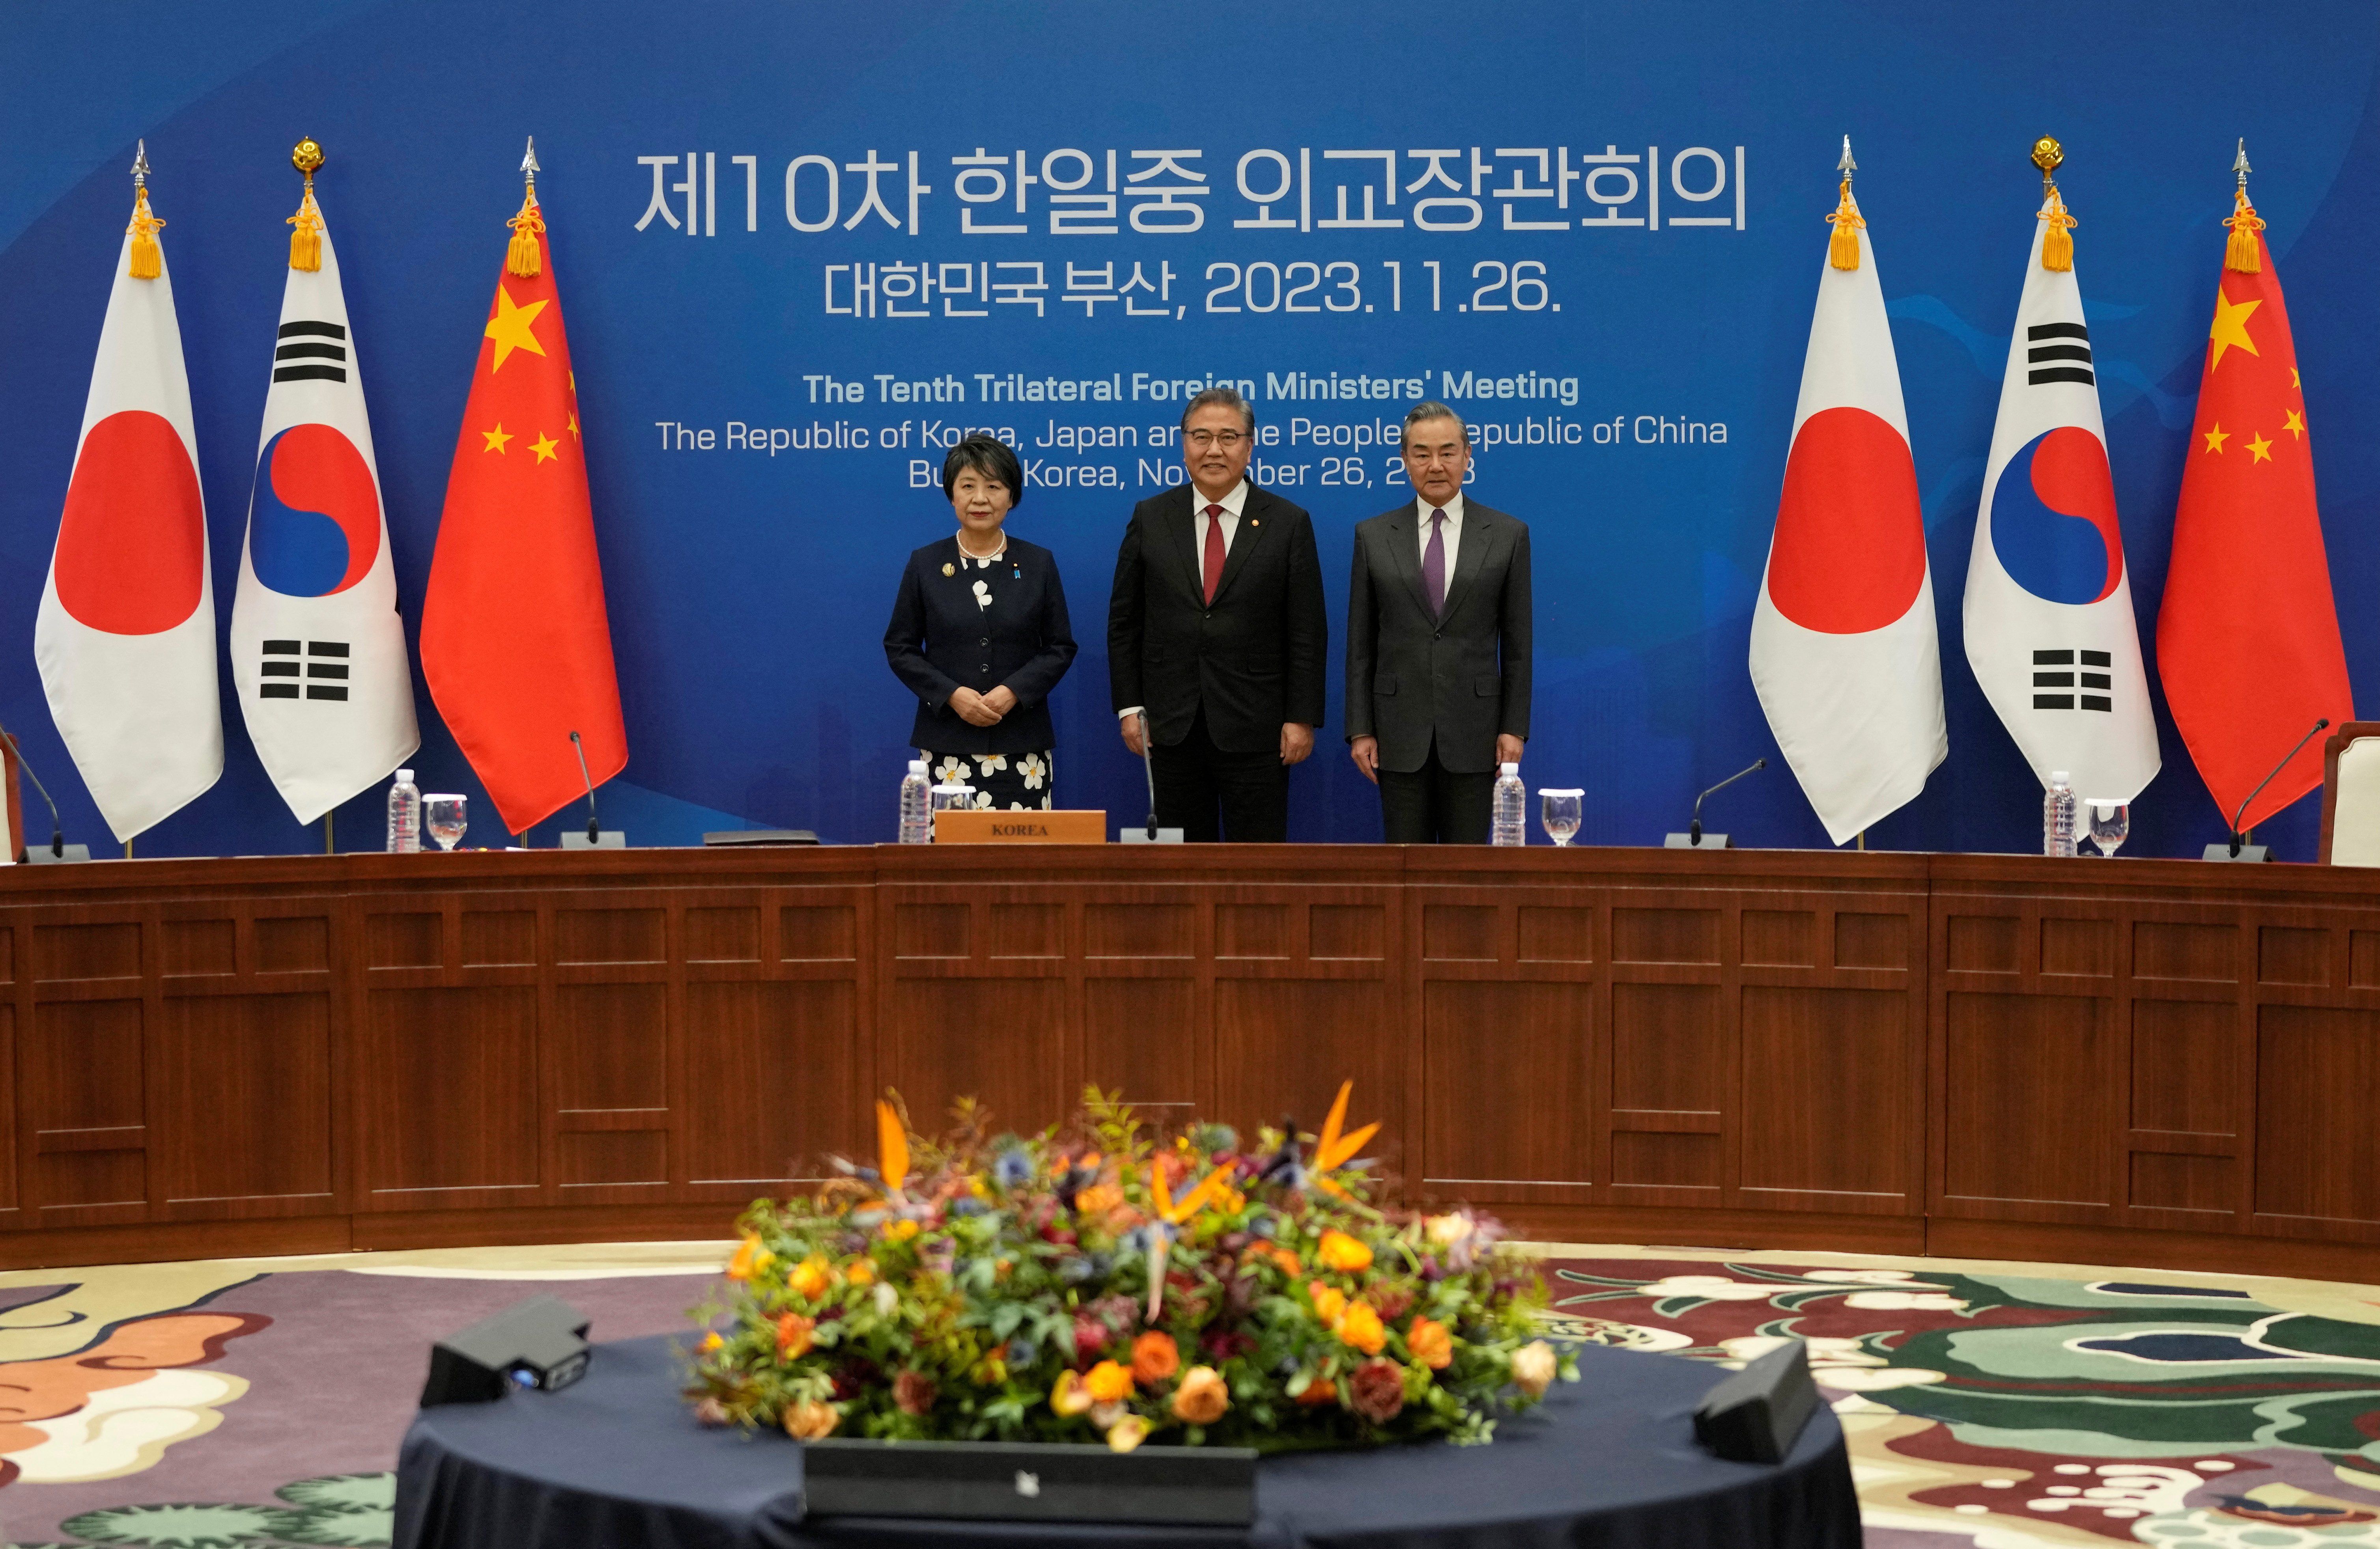 Chinese Foreign Minister Wang Yi, South Korean Foreign Minister Park Jin, and Japanese Foreign Minister Yoko Kamikawa pose for a photo prior to the 10th trilateral foreign ministers' meeting in Busan, South Korea, Sunday, Nov. 26, 2023. 